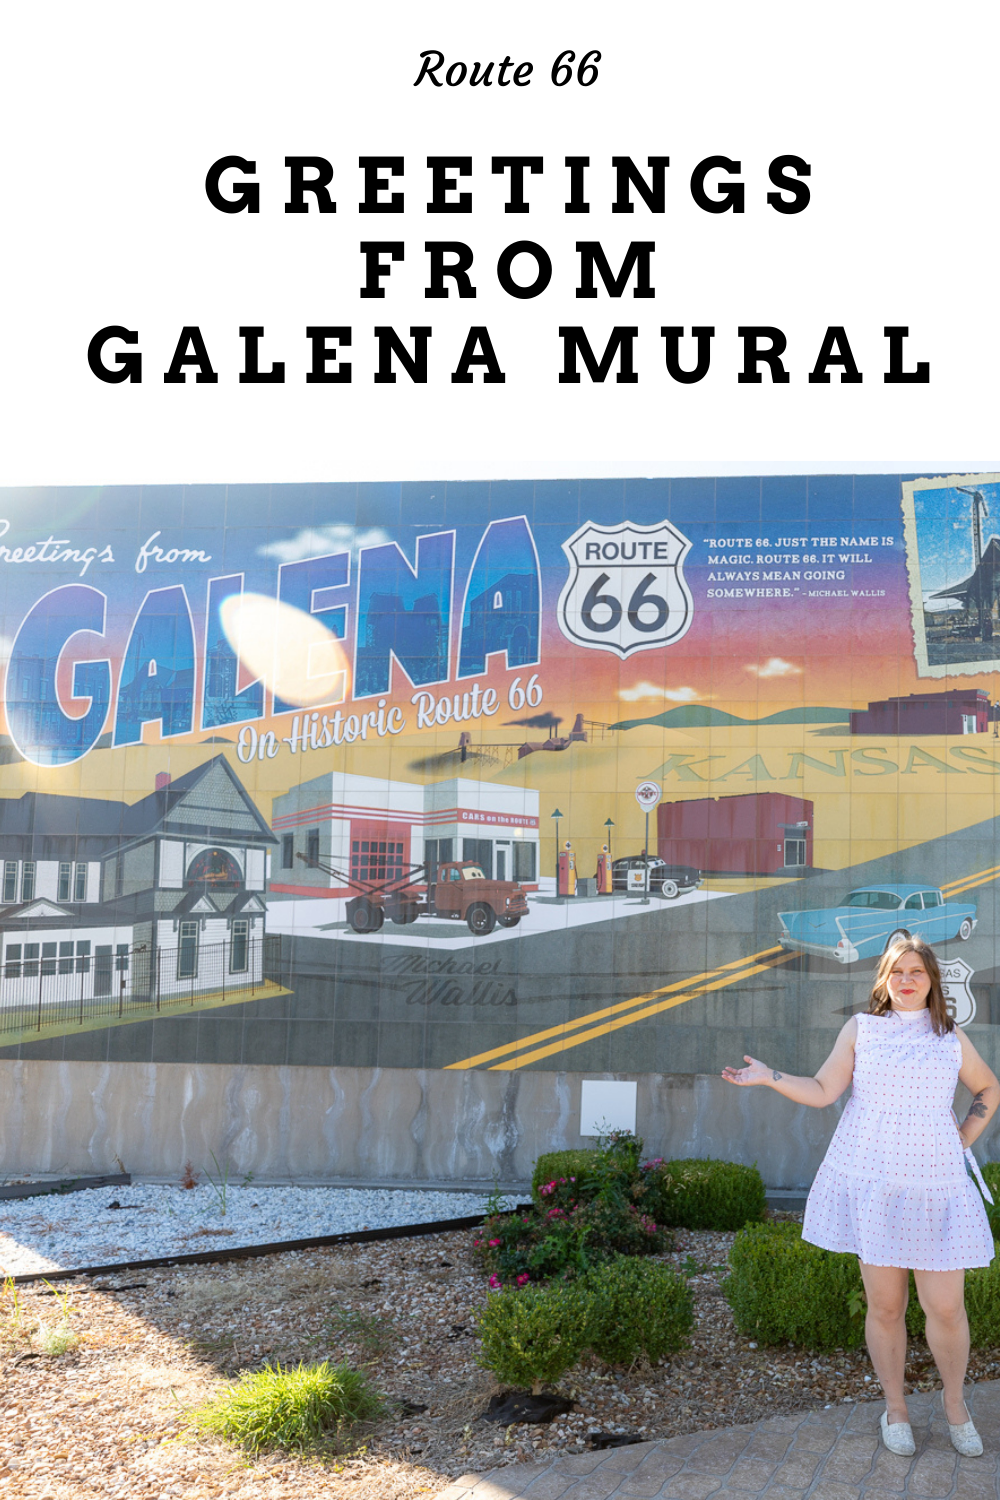 Kansas might hold the smallest section of Route 66, but it packs in the sites. Be sure to pull over and visit the Greetings from Galena mural in Galena, Kansas and also check out some of the popular sites depicted within.  #Route66 #Route66RoadTrip #Kansas #KansasRoadTrip #RoadTrip #RoadsideAttraction #RoadsideAttractions #KansasRoadsideAttraction